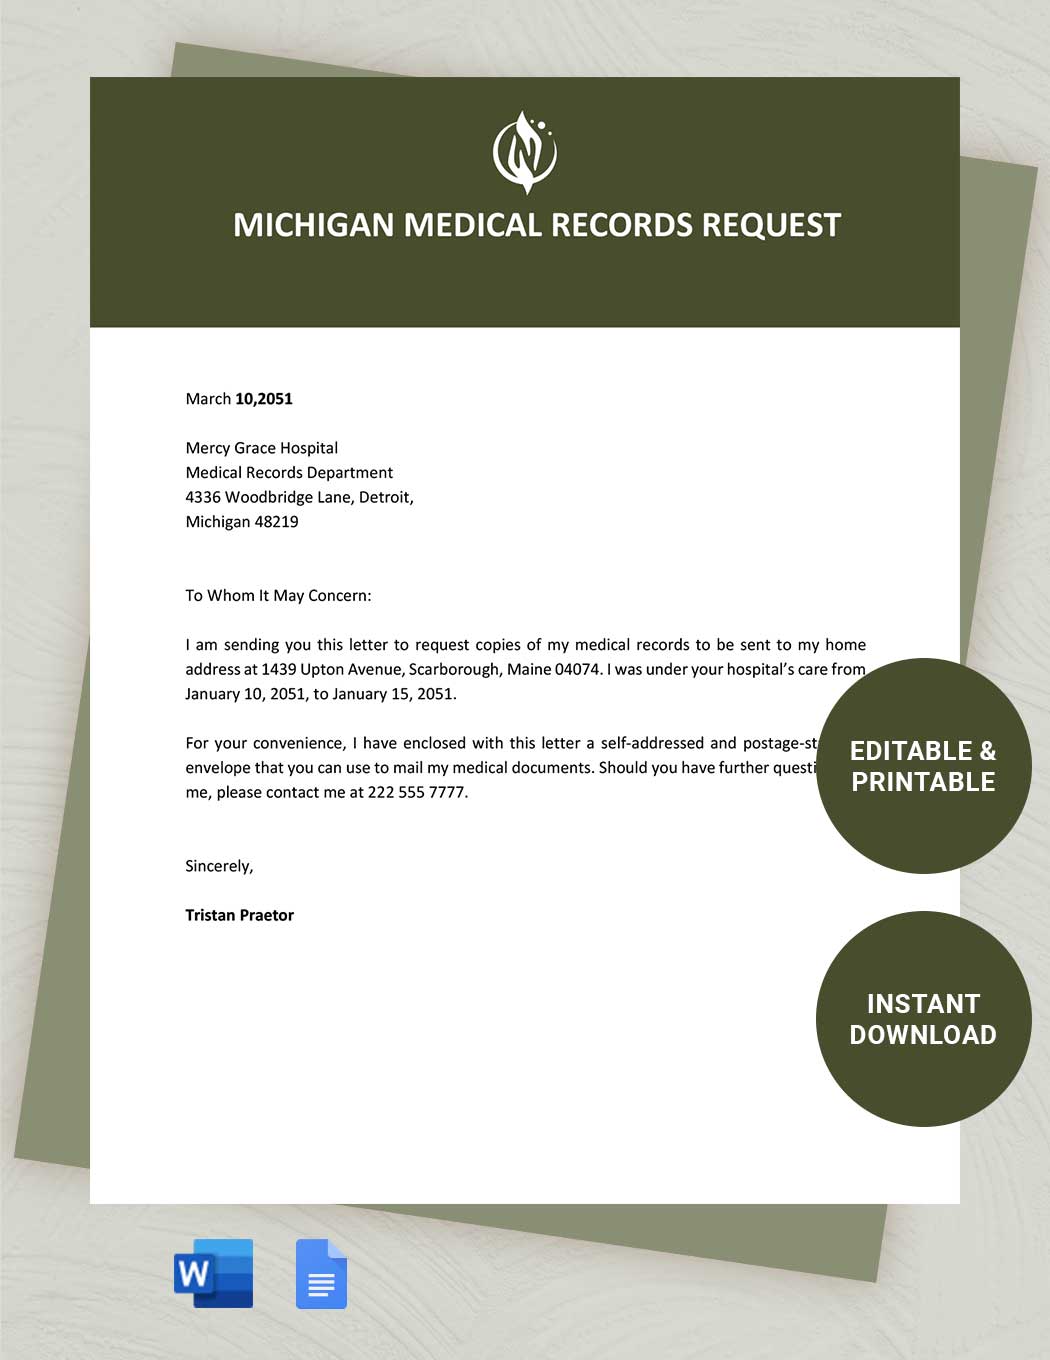 Michigan Medical Records Request Template Download in Word, Google